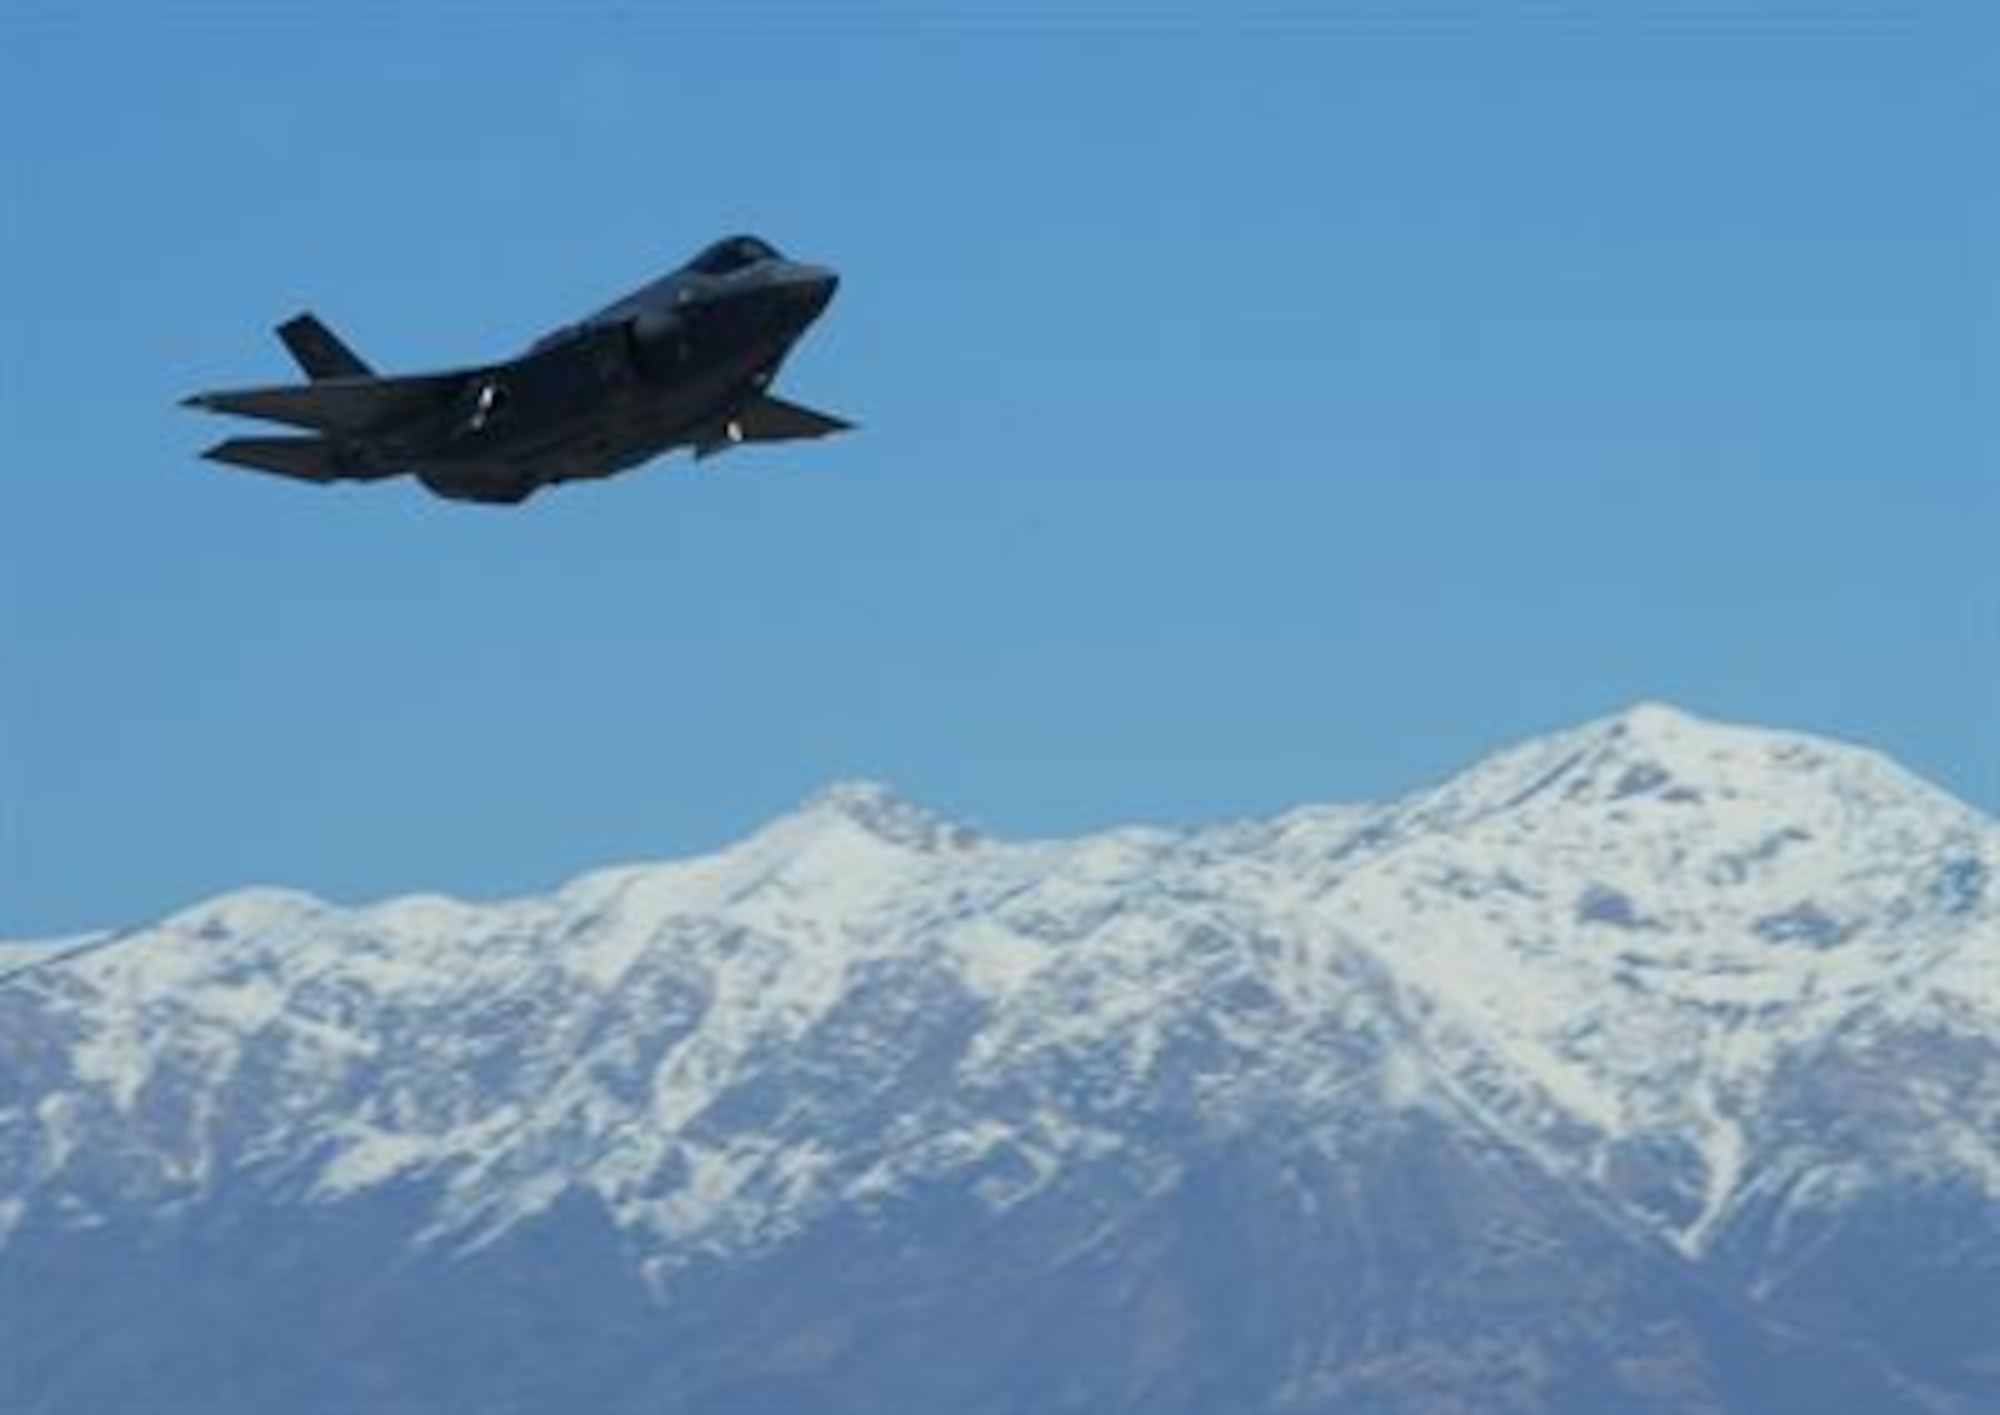 An F-35A Lightning II takes off from Hill Air Force Base, Utah, March 14, 2014. (U.S. Air Force photo/Airman 1st Class Joshua D. King)